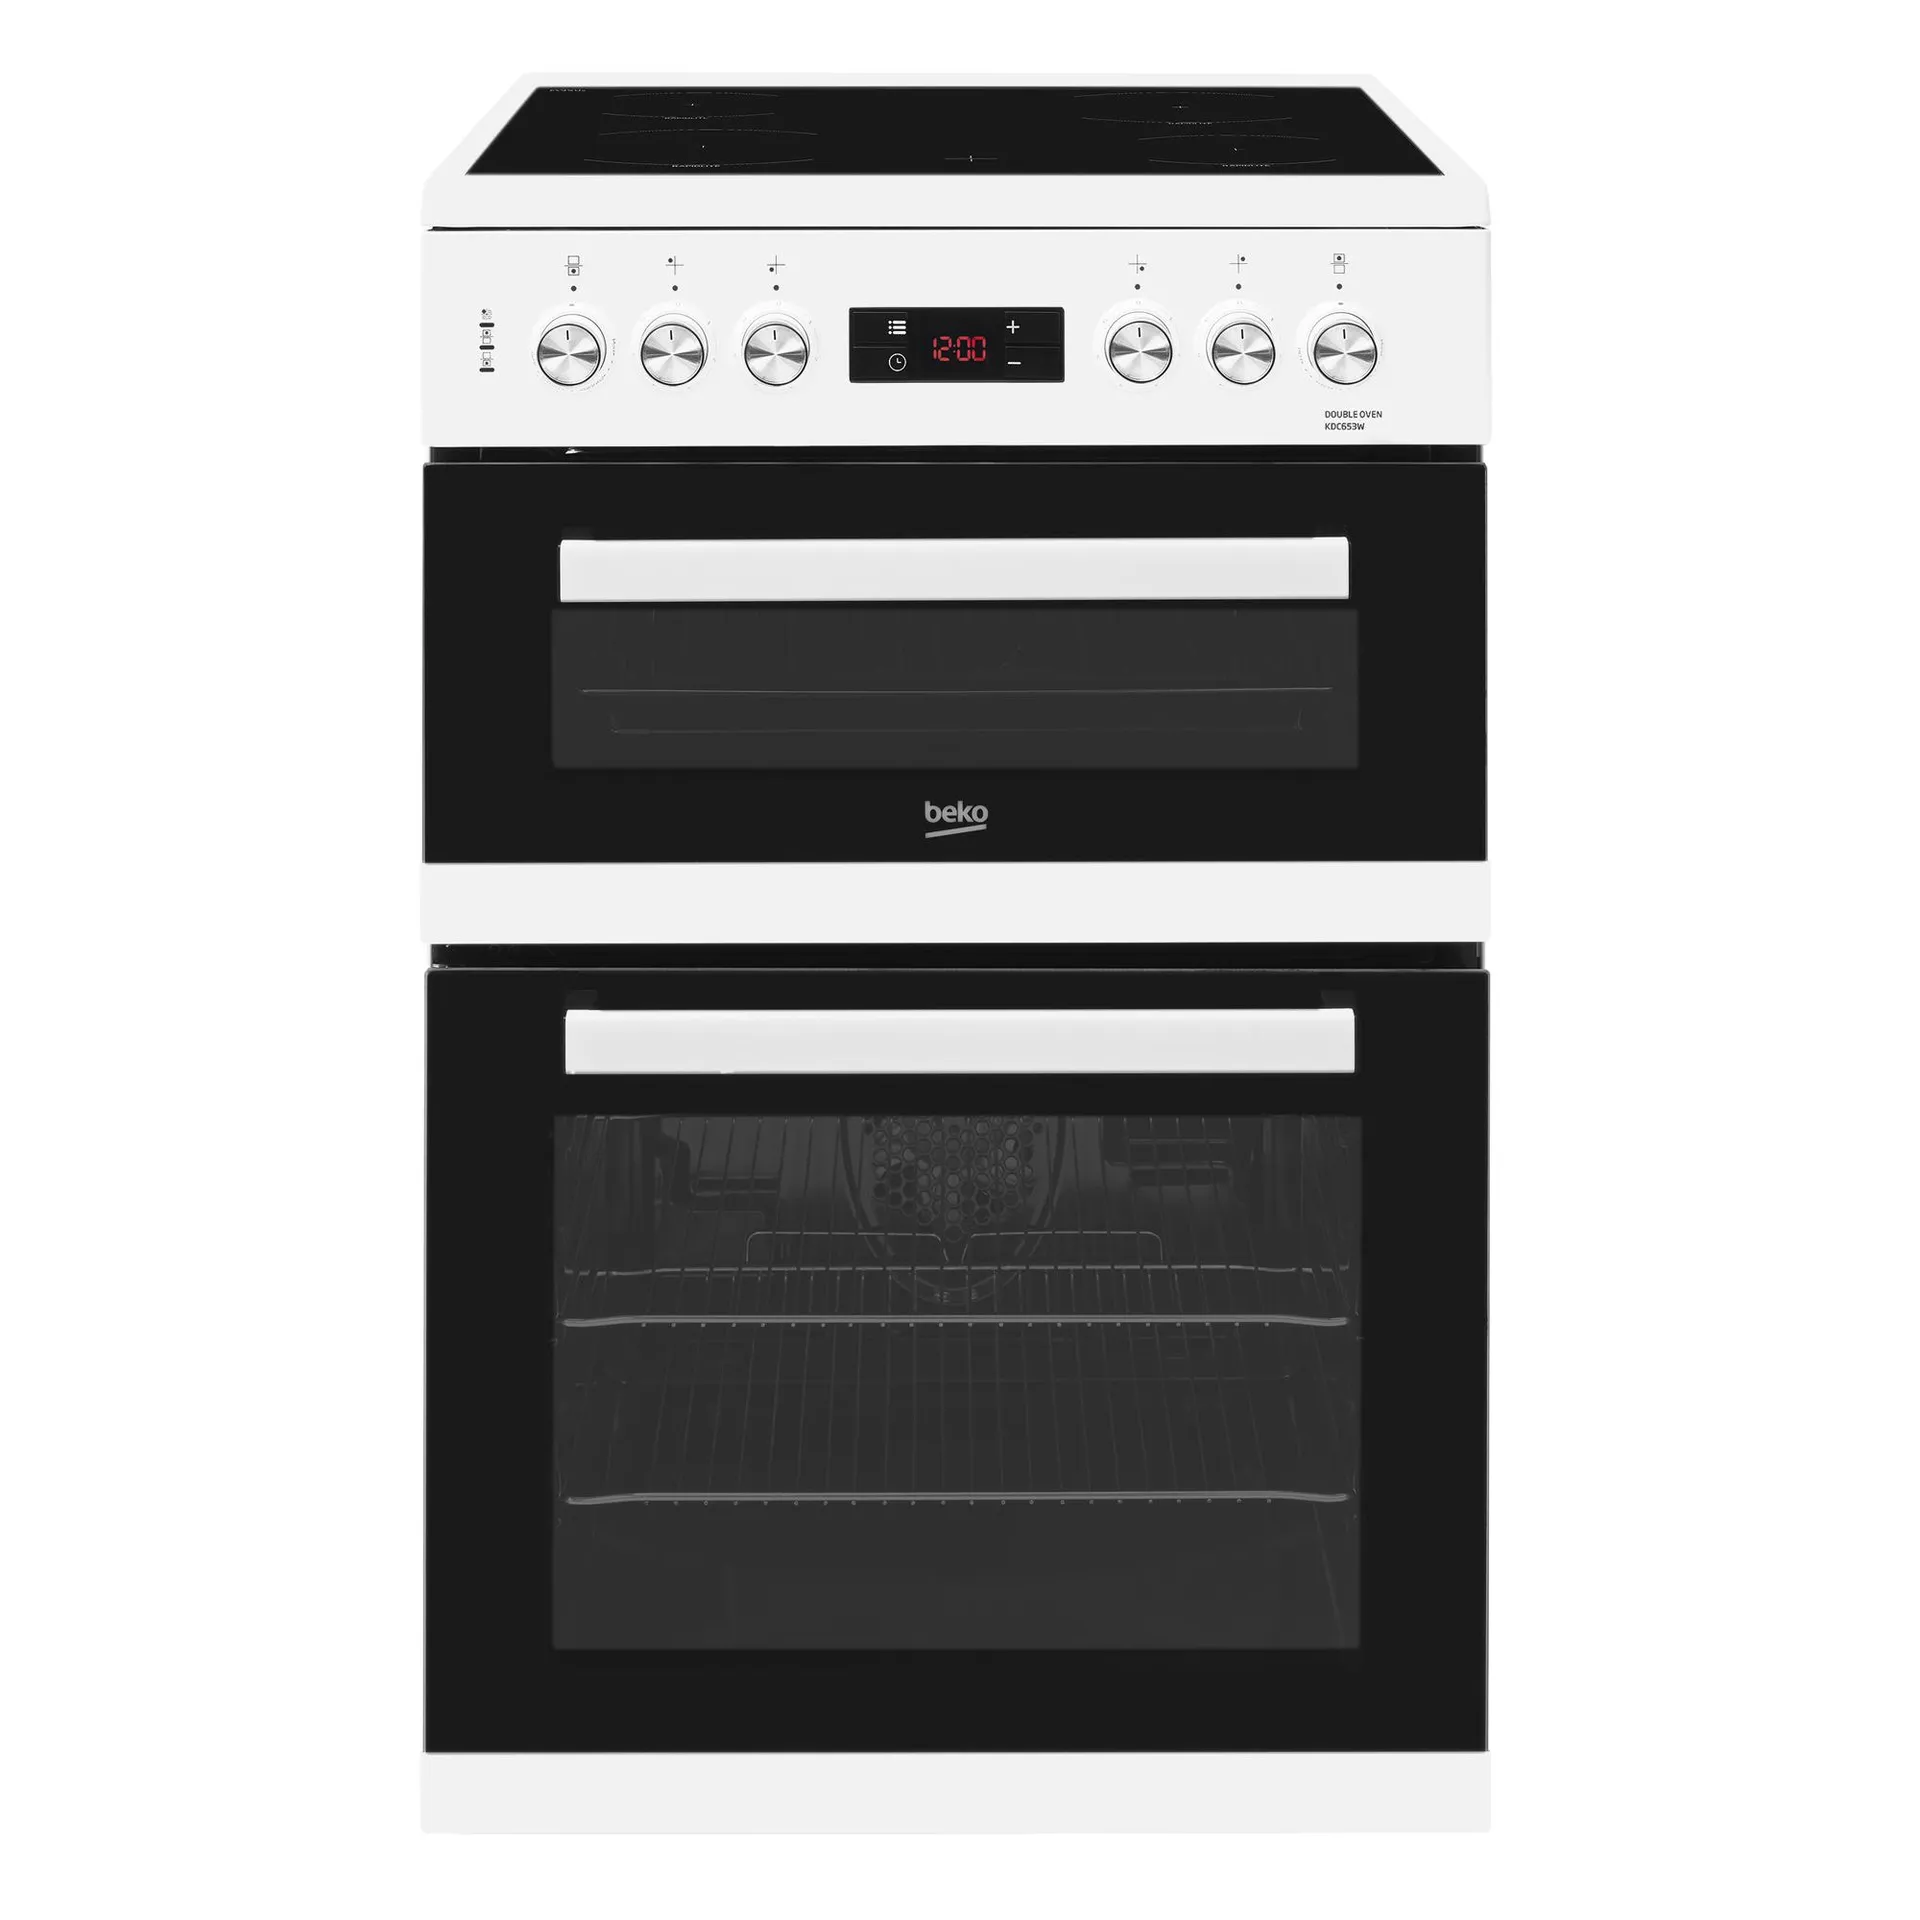 Beko KDC653W Electric Cooker with Ceramic Hob